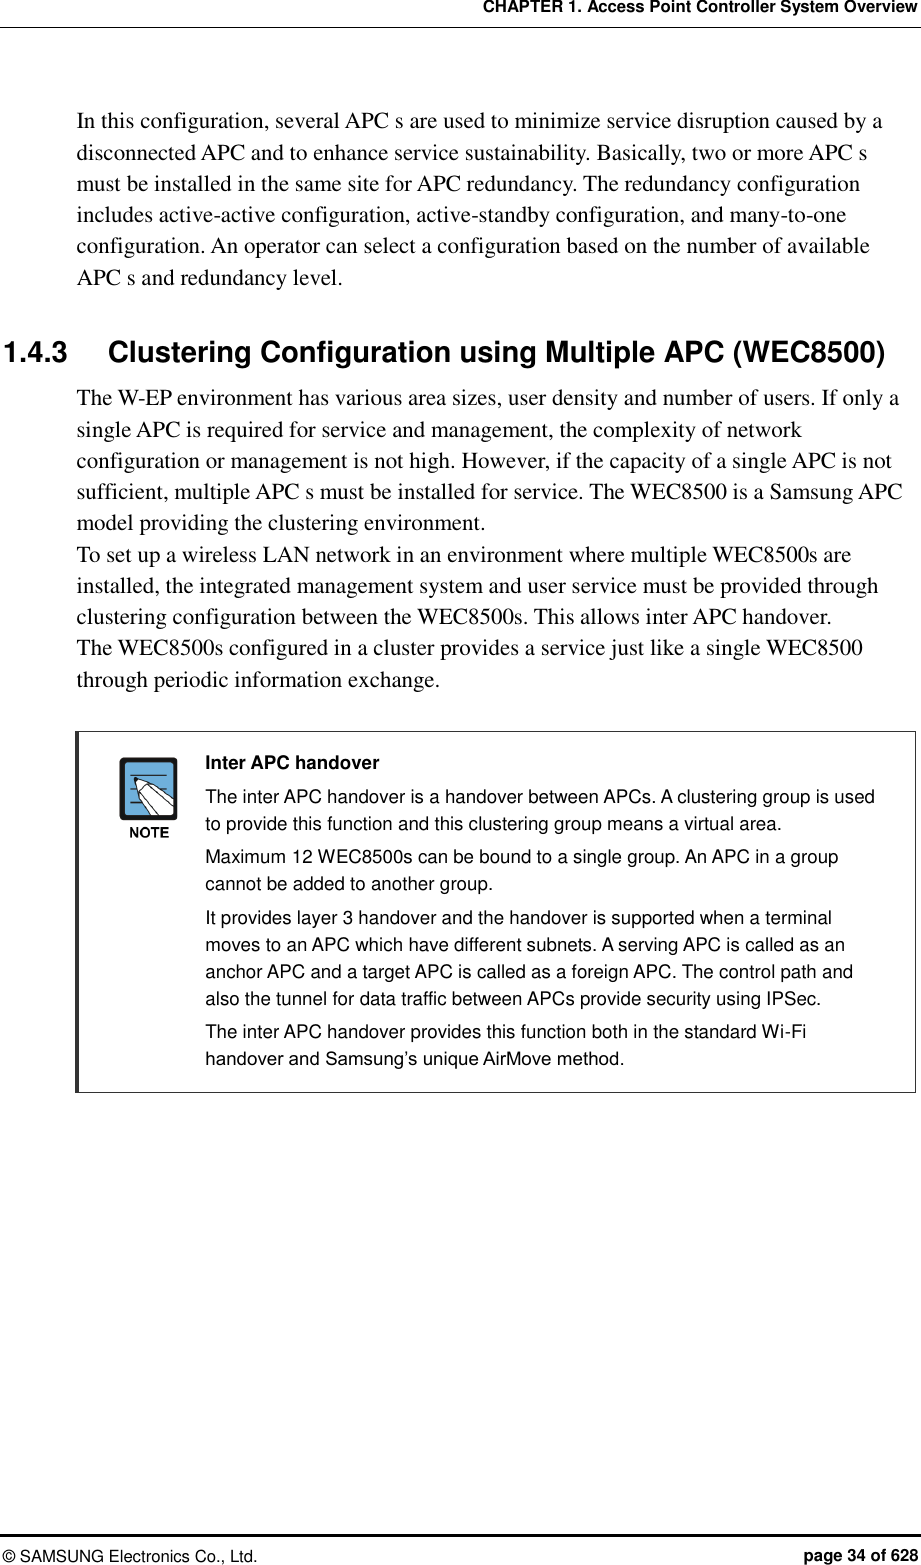 CHAPTER 1. Access Point Controller System Overview ©  SAMSUNG Electronics Co., Ltd.  page 34 of 628 In this configuration, several APC s are used to minimize service disruption caused by a disconnected APC and to enhance service sustainability. Basically, two or more APC s must be installed in the same site for APC redundancy. The redundancy configuration includes active-active configuration, active-standby configuration, and many-to-one configuration. An operator can select a configuration based on the number of available APC s and redundancy level.  1.4.3  Clustering Configuration using Multiple APC (WEC8500) The W-EP environment has various area sizes, user density and number of users. If only a single APC is required for service and management, the complexity of network configuration or management is not high. However, if the capacity of a single APC is not sufficient, multiple APC s must be installed for service. The WEC8500 is a Samsung APC model providing the clustering environment. To set up a wireless LAN network in an environment where multiple WEC8500s are installed, the integrated management system and user service must be provided through clustering configuration between the WEC8500s. This allows inter APC handover.   The WEC8500s configured in a cluster provides a service just like a single WEC8500 through periodic information exchange.       Inter APC handover     The inter APC handover is a handover between APCs. A clustering group is used to provide this function and this clustering group means a virtual area.       Maximum 12 WEC8500s can be bound to a single group. An APC in a group cannot be added to another group.       It provides layer 3 handover and the handover is supported when a terminal moves to an APC which have different subnets. A serving APC is called as an anchor APC and a target APC is called as a foreign APC. The control path and also the tunnel for data traffic between APCs provide security using IPSec.       The inter APC handover provides this function both in the standard Wi-Fi handover and Samsung’s unique AirMove method.  